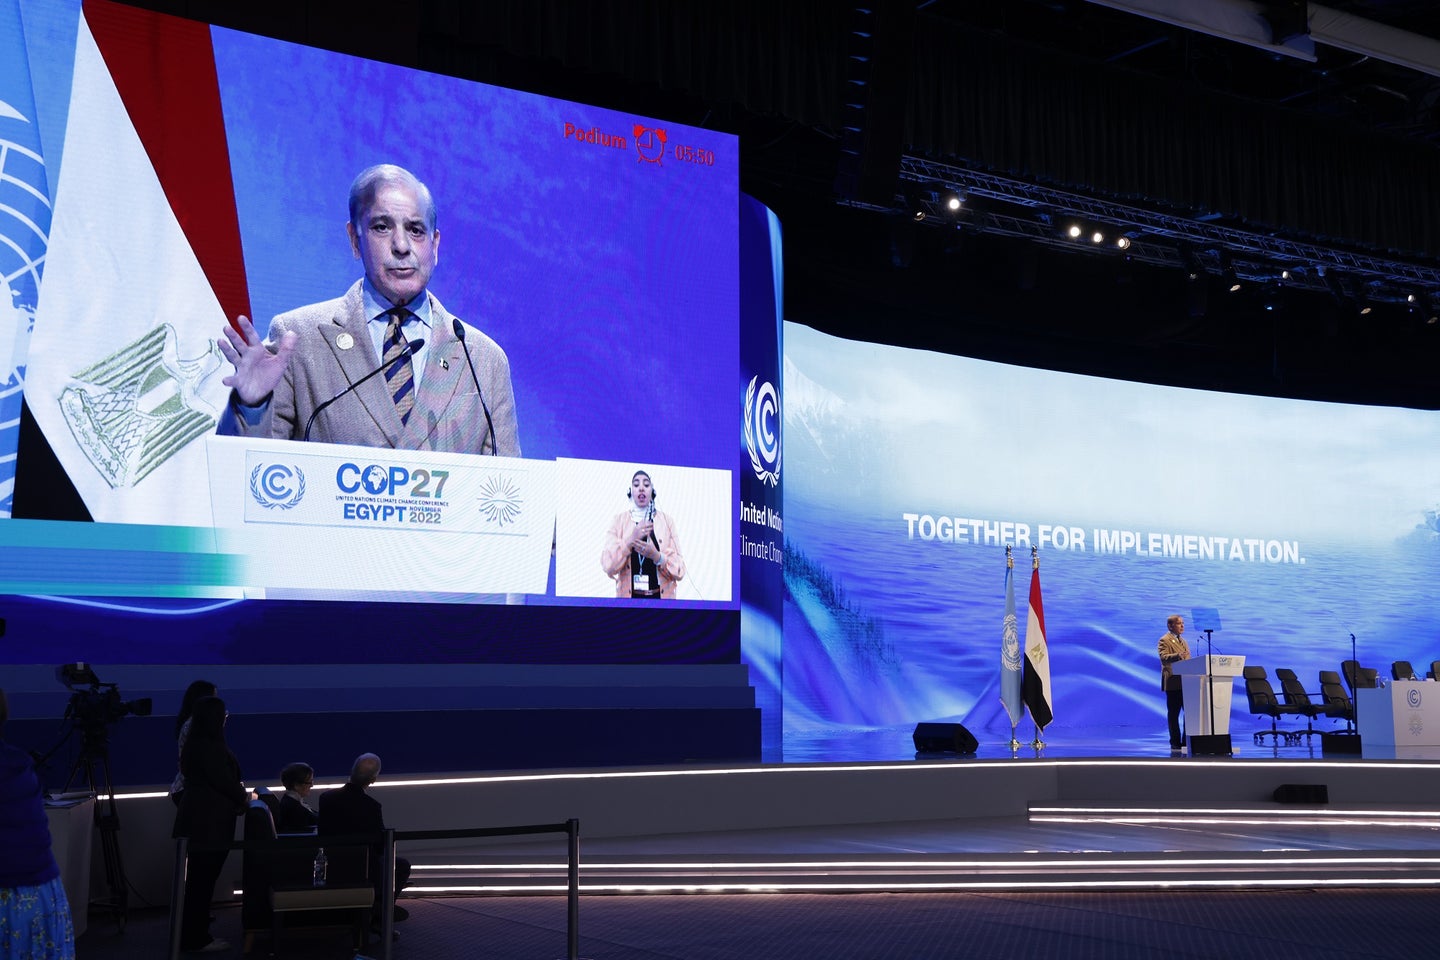 Pakistan Prime Minister Shehbaz Sharif on the stage at COP27 in Egypt